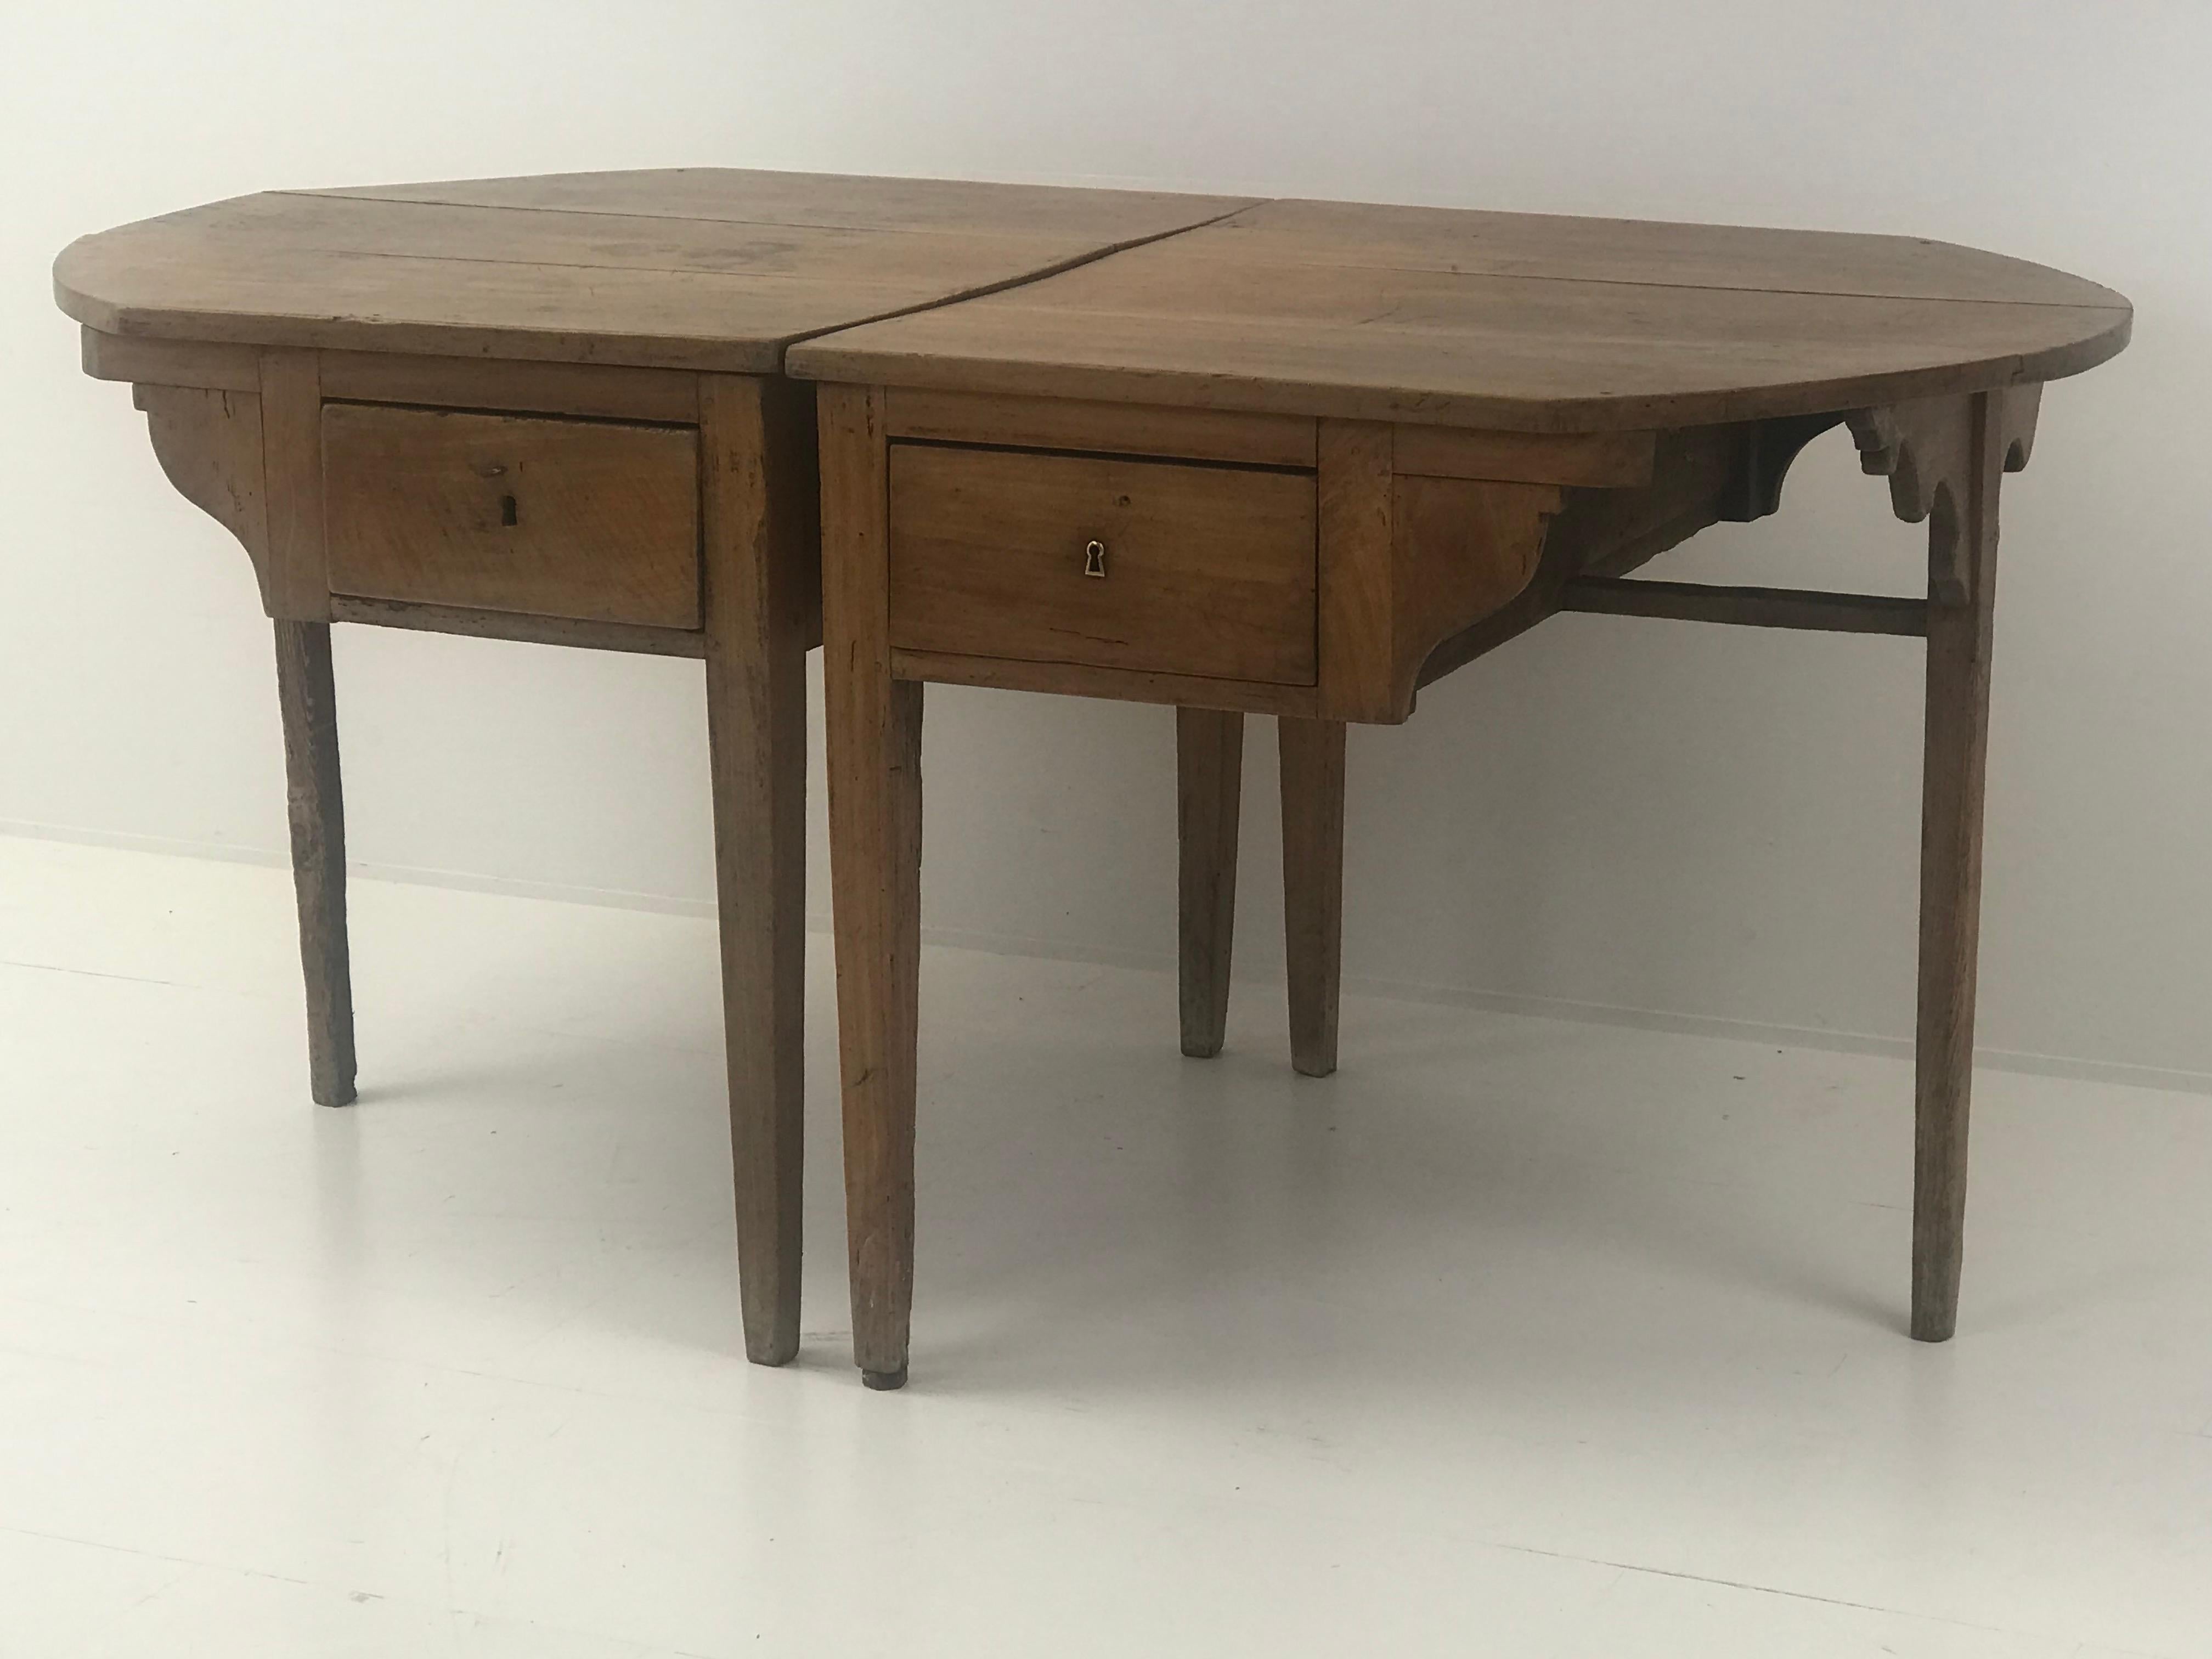 Exceptional pair of consoles that can be put together as a table
each console has 2 drawers
Chestnut wood
Spain.